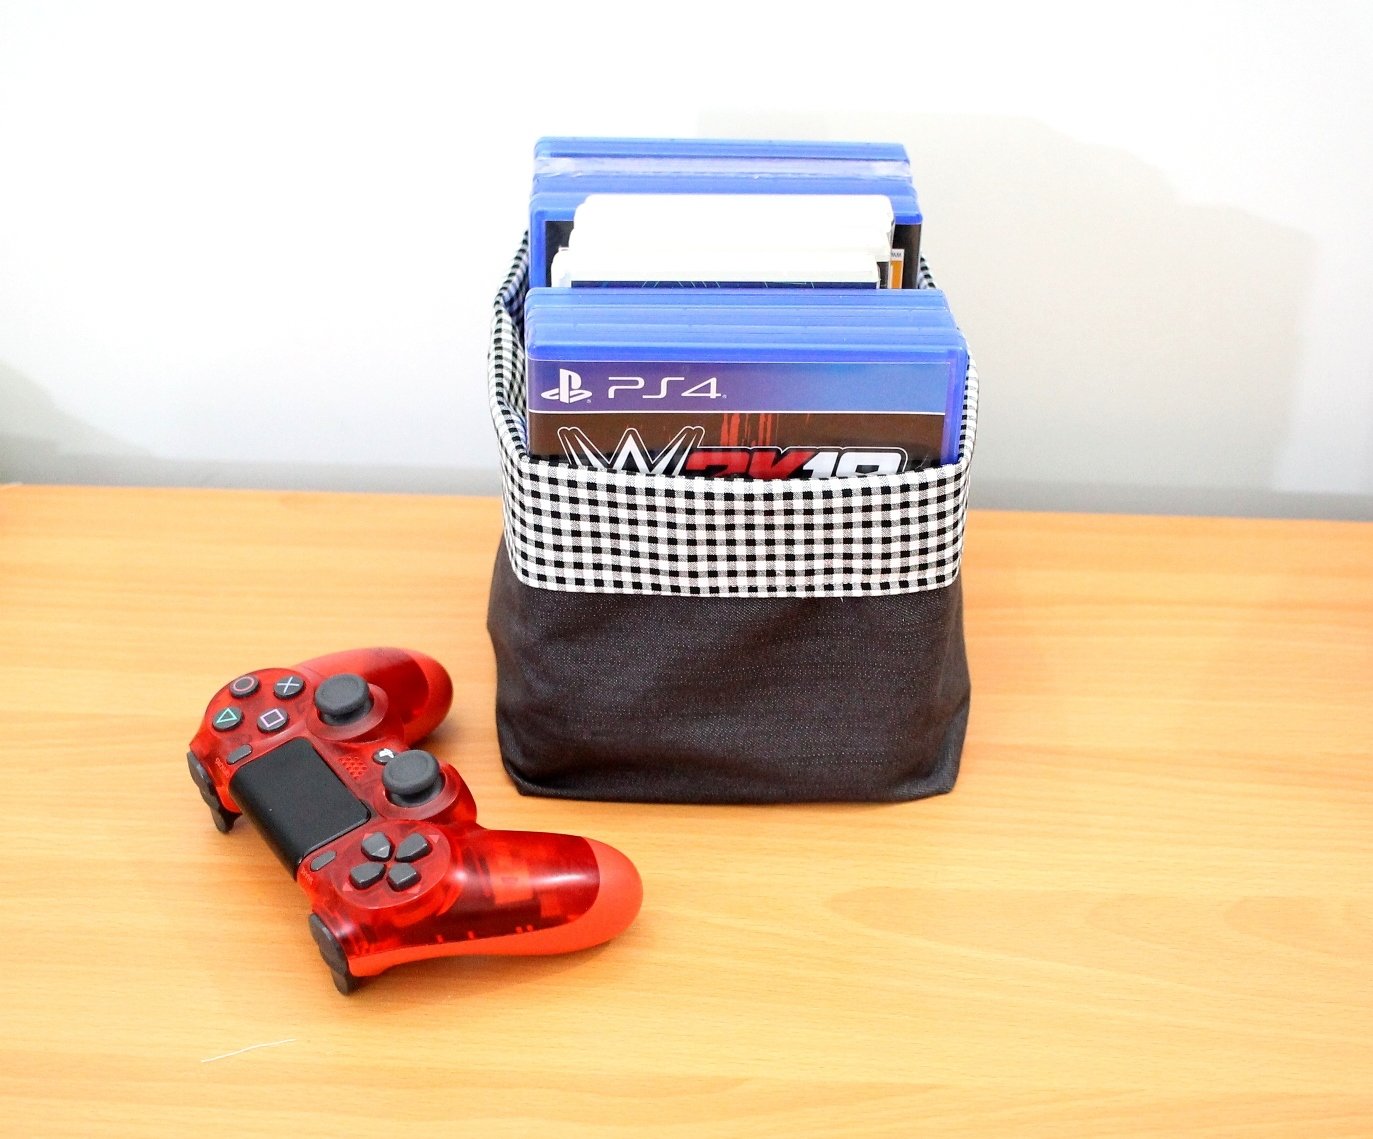 Reversible Fabric Storage for PS4 DVD - Denim Black And White Gingham